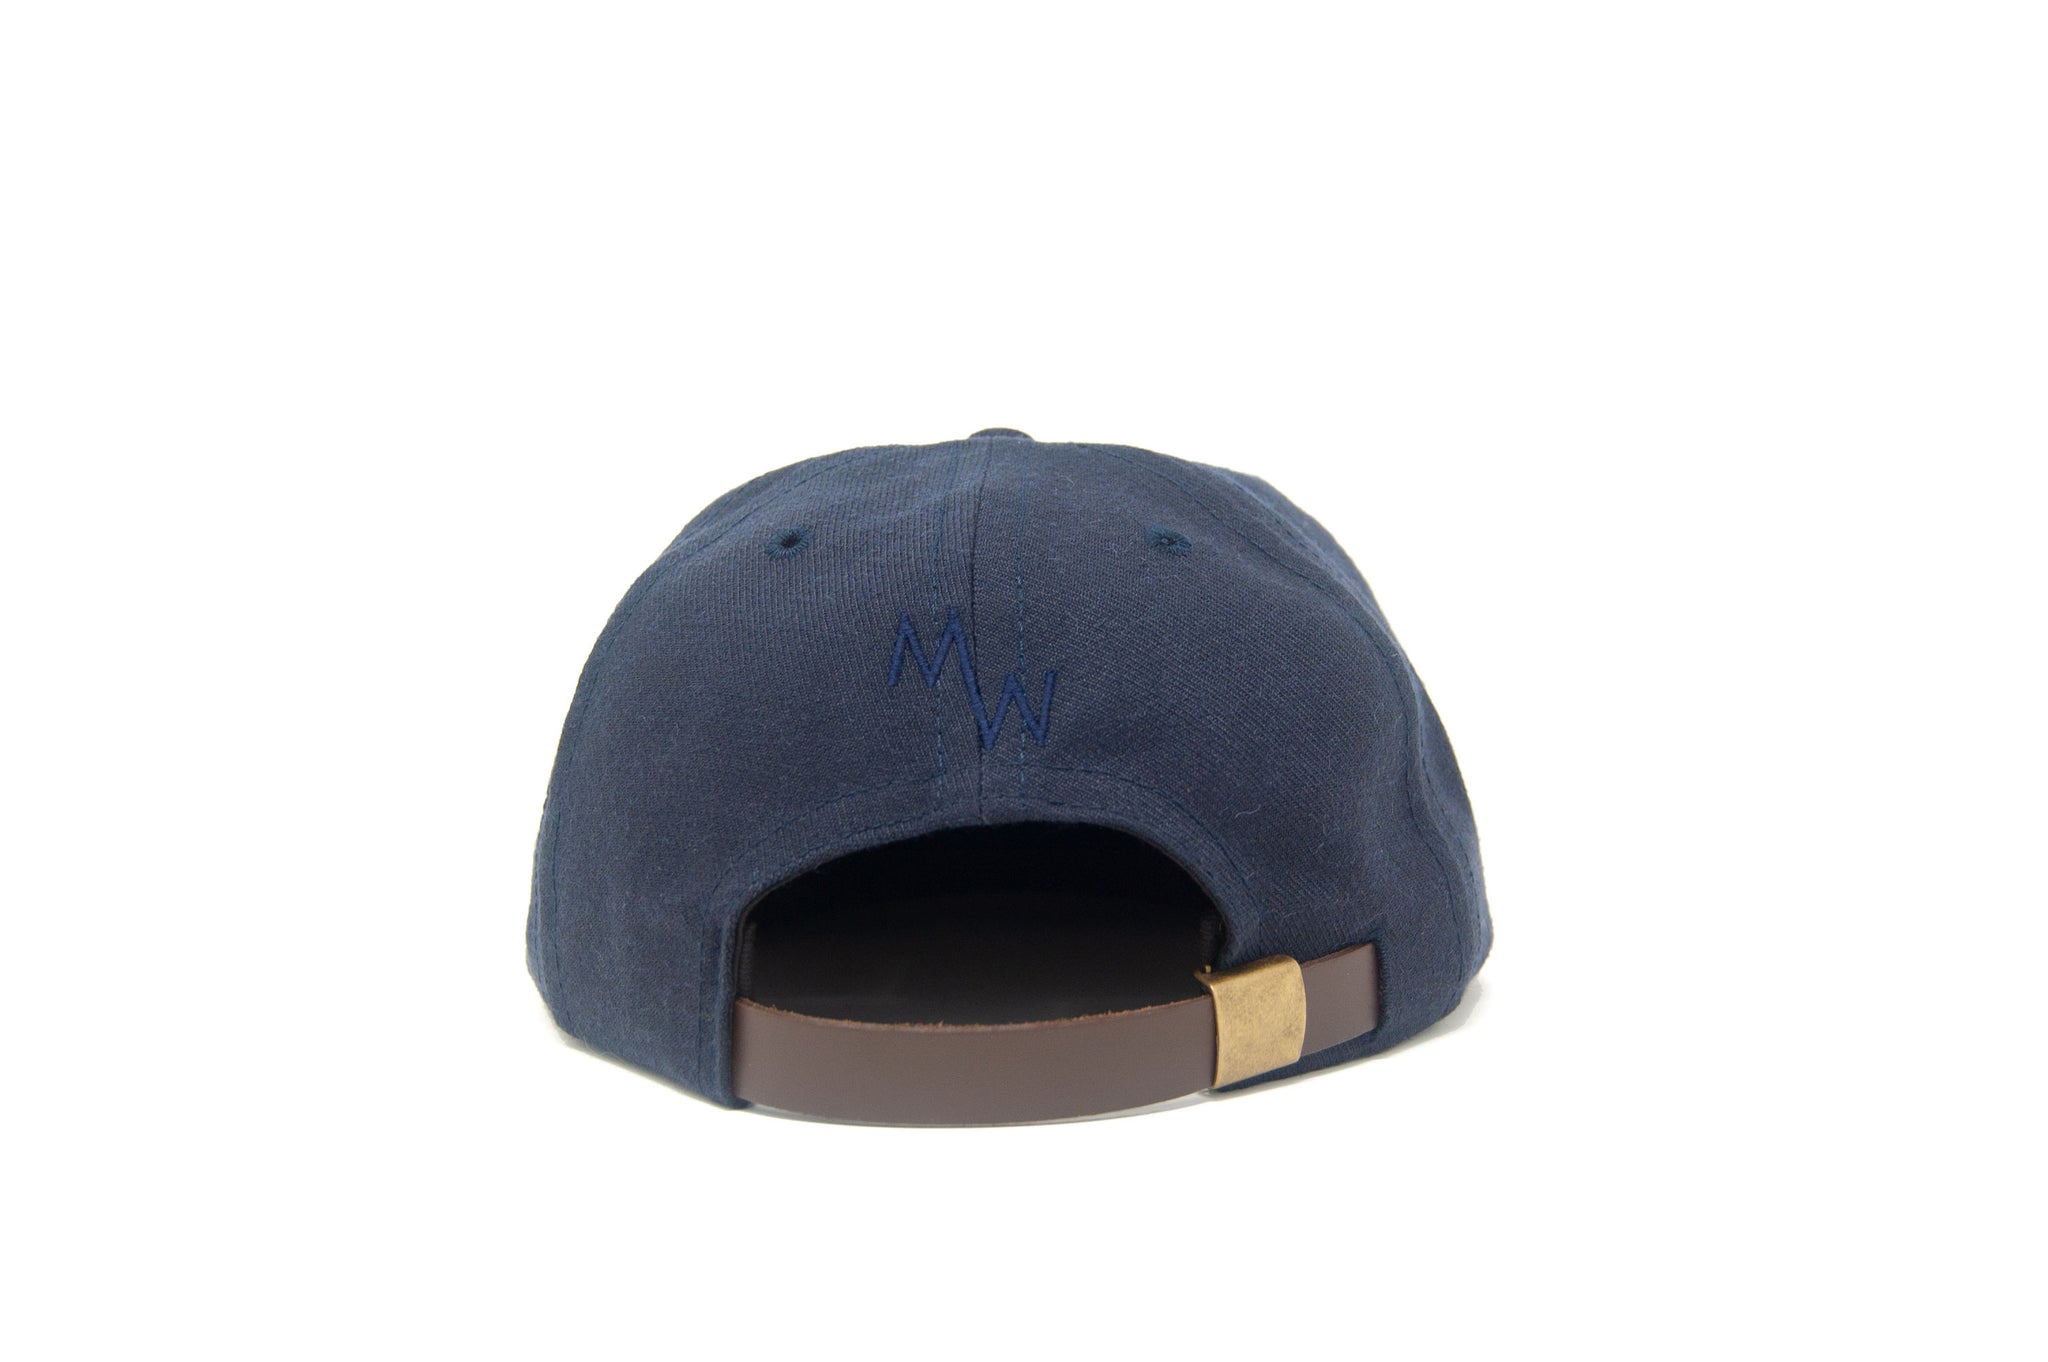 Ampal x MADEWEST "Flying Can" Strapback